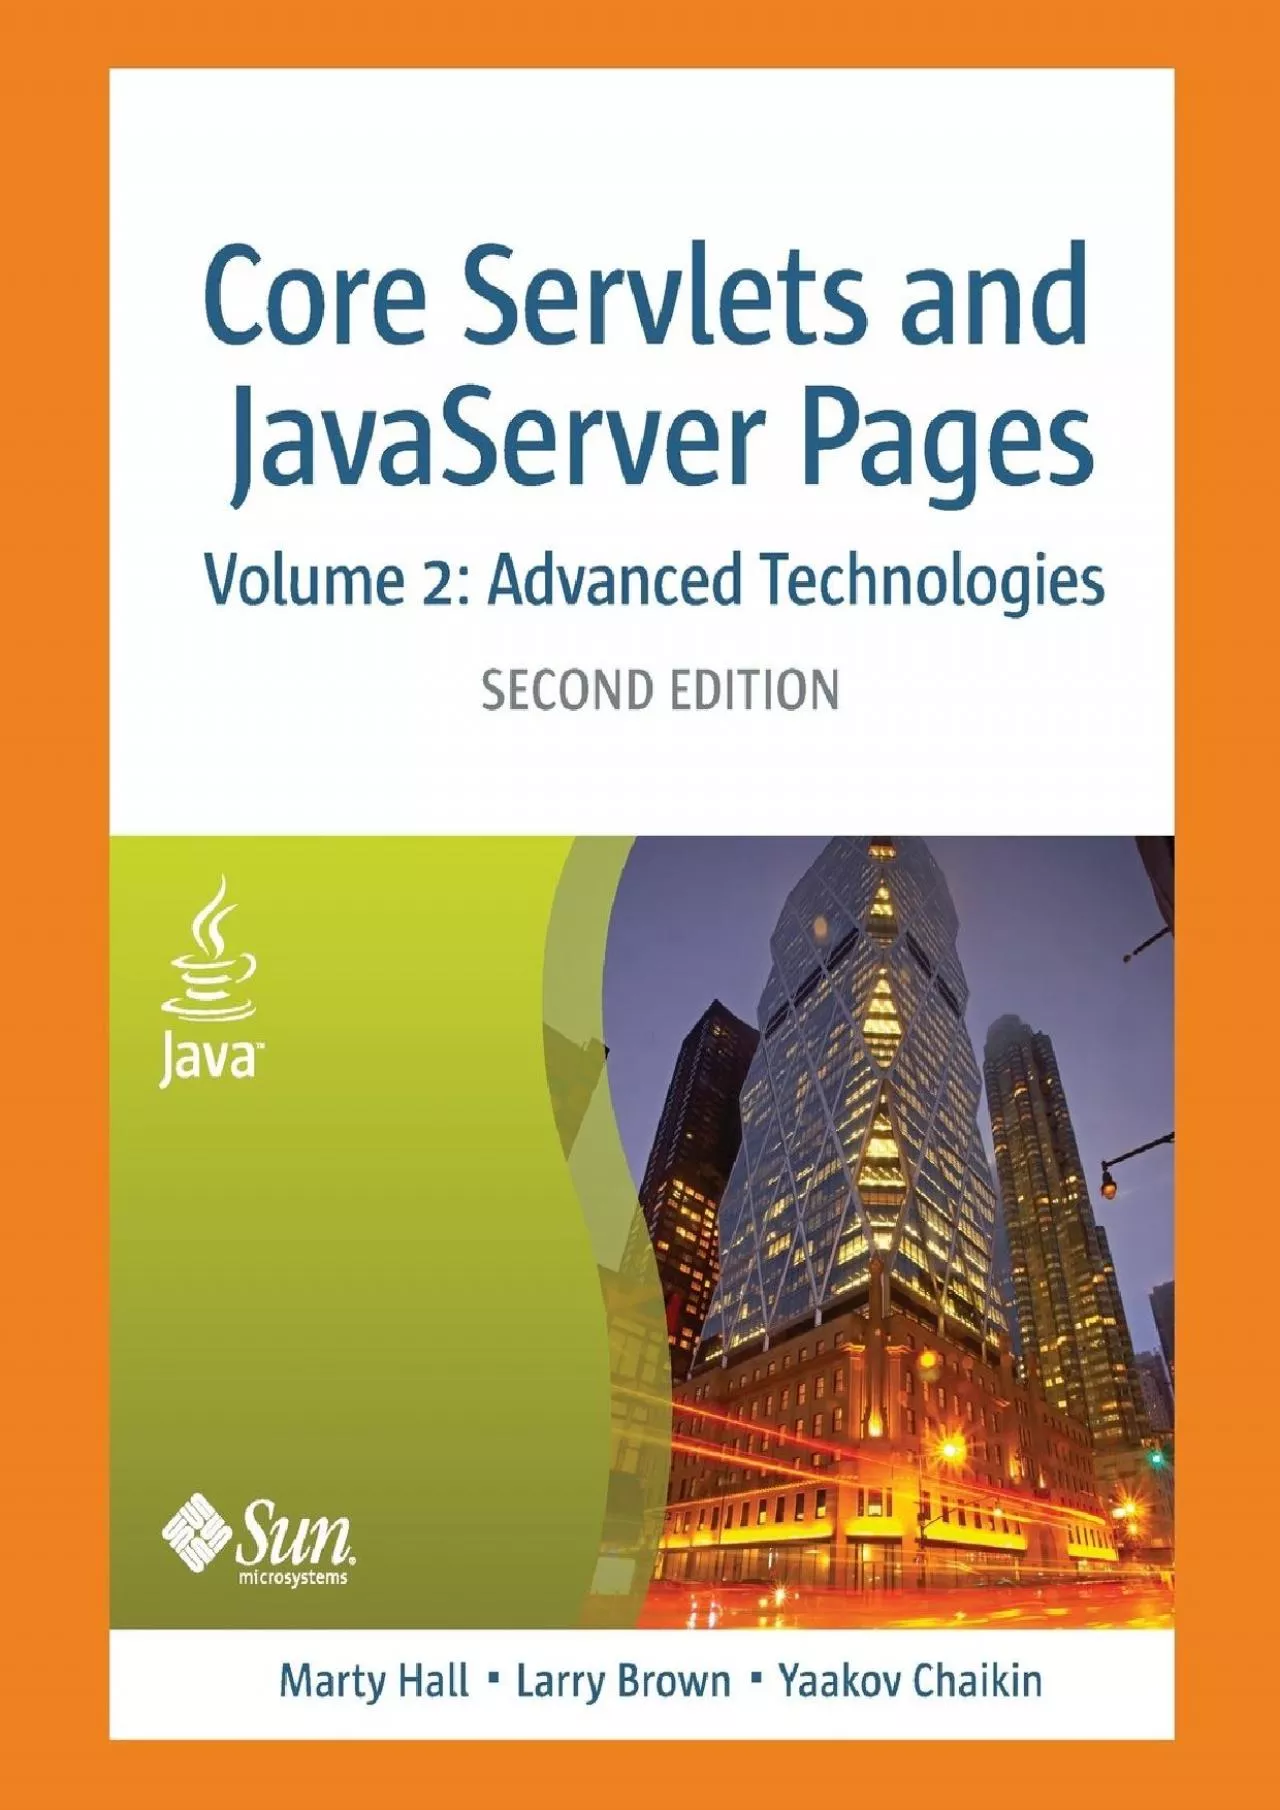 [DOWLOAD]-Core Servlets and Javaserver Pages: Advanced Technologies, Vol. 2 (2nd Edition)